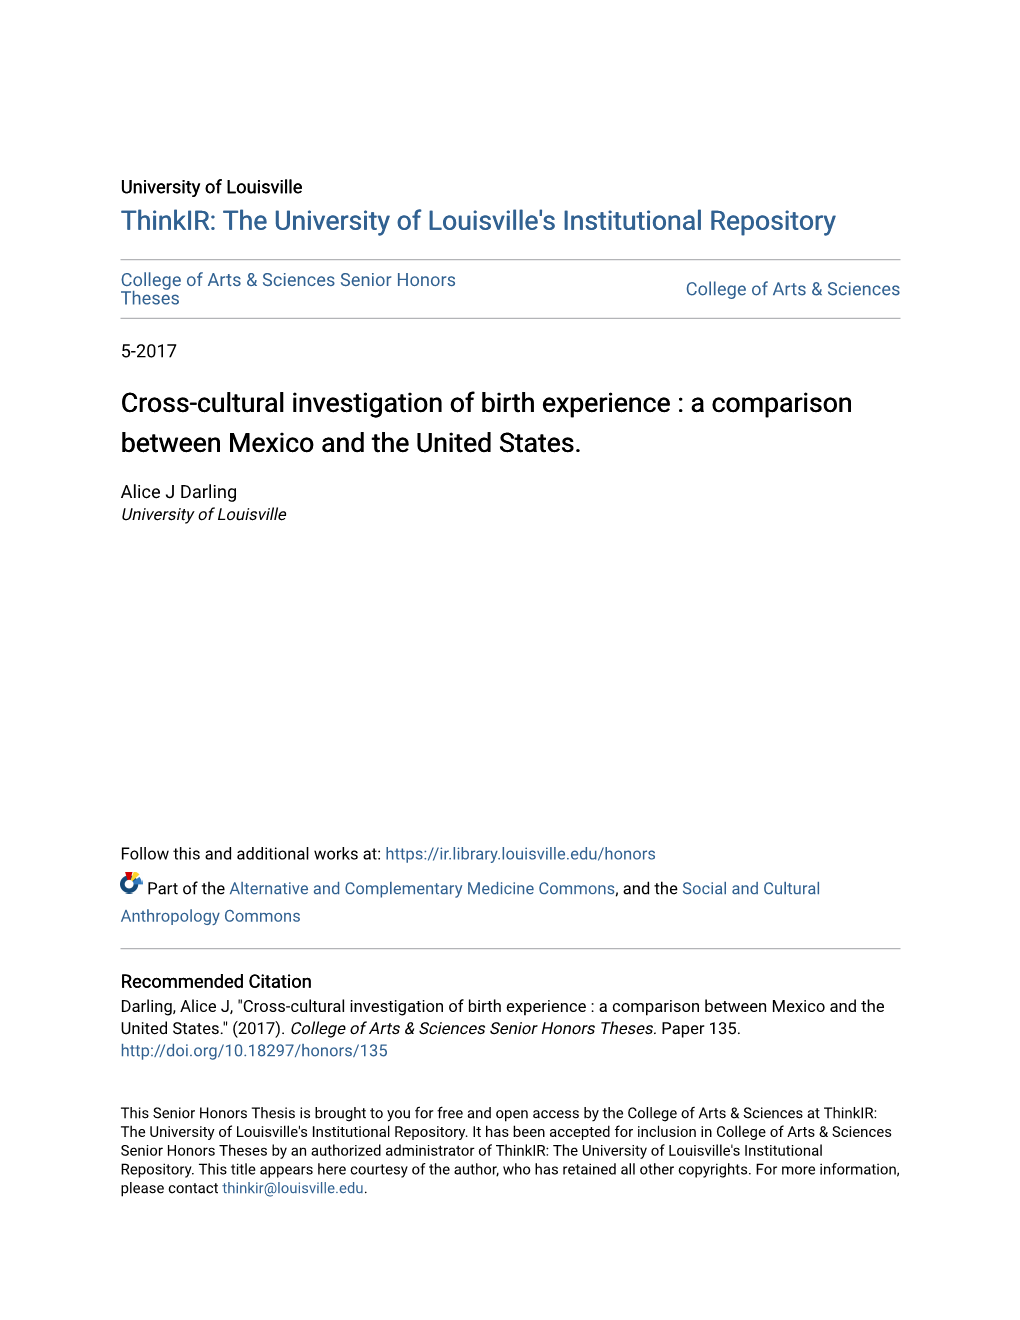 Cross-Cultural Investigation of Birth Experience : a Comparison Between Mexico and the United States